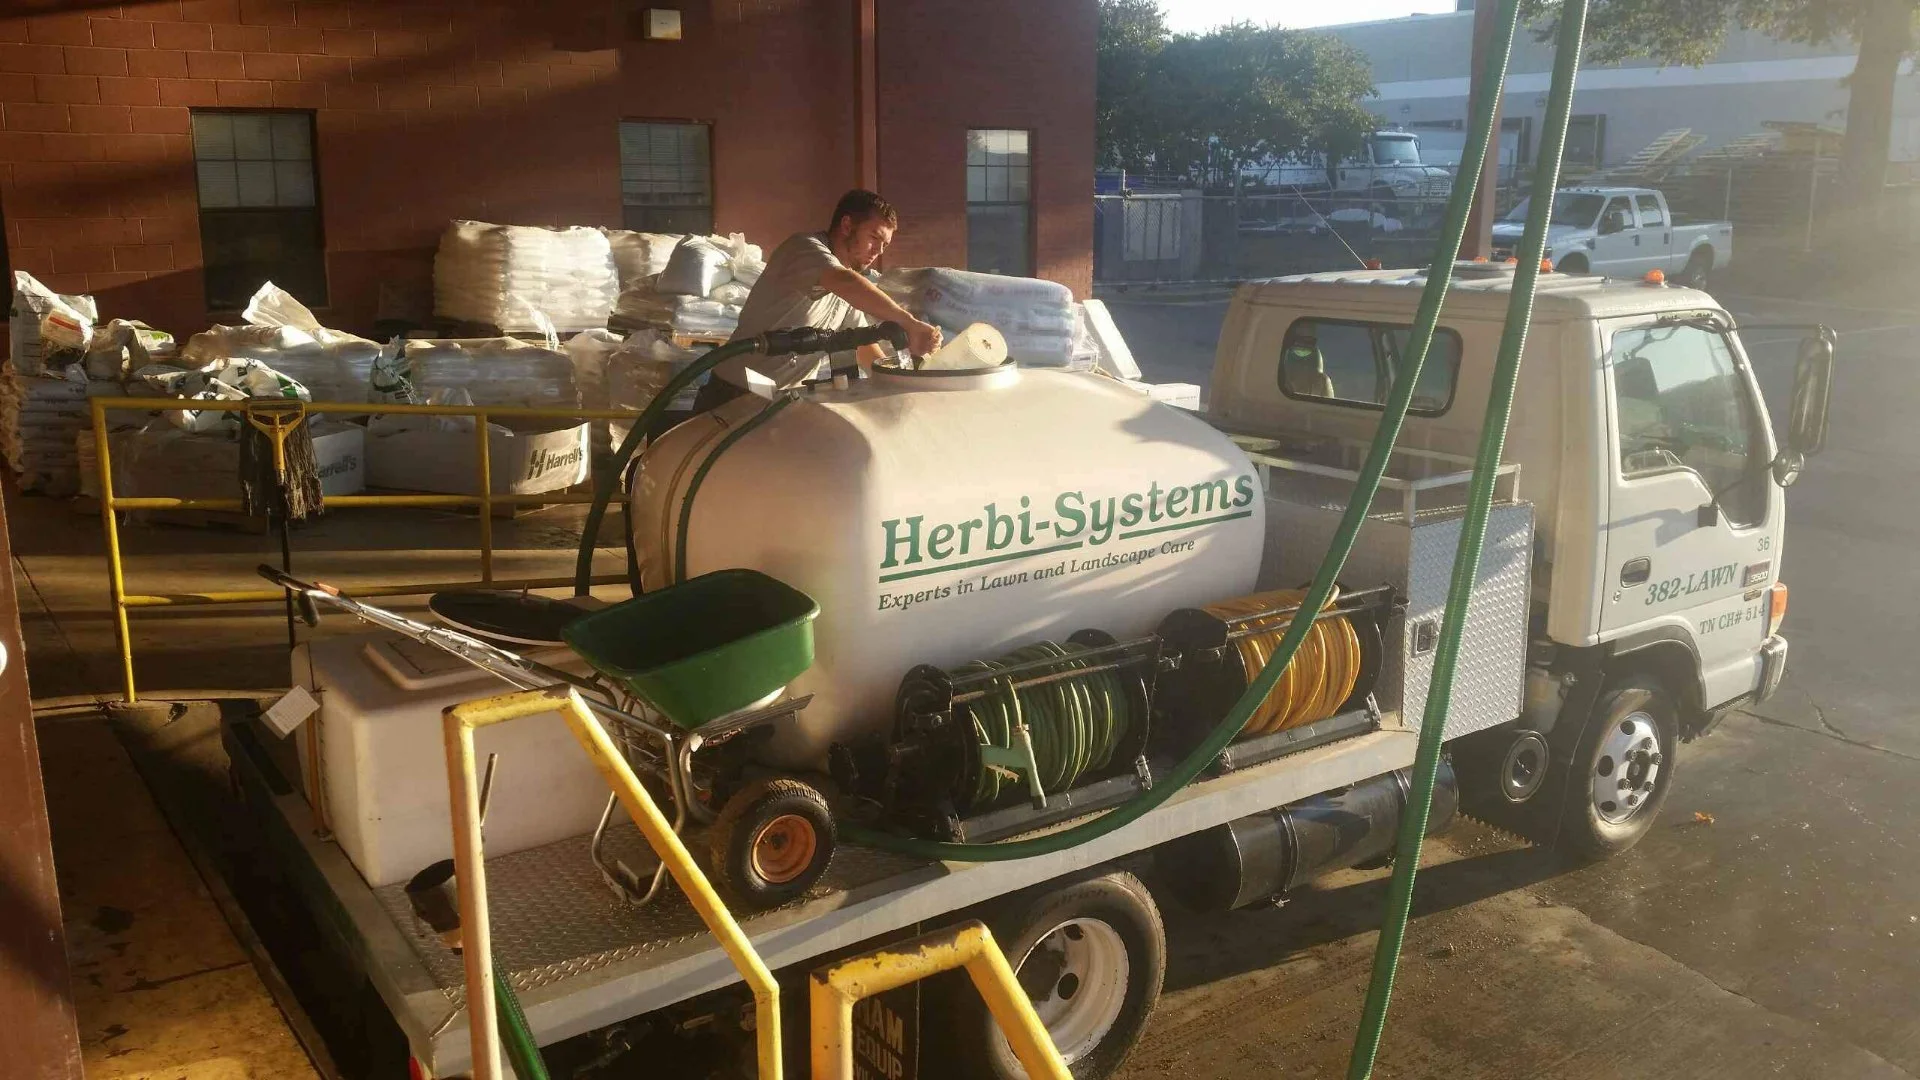 Herbi-Systems technician filling the lawn care truck with fertilizer.